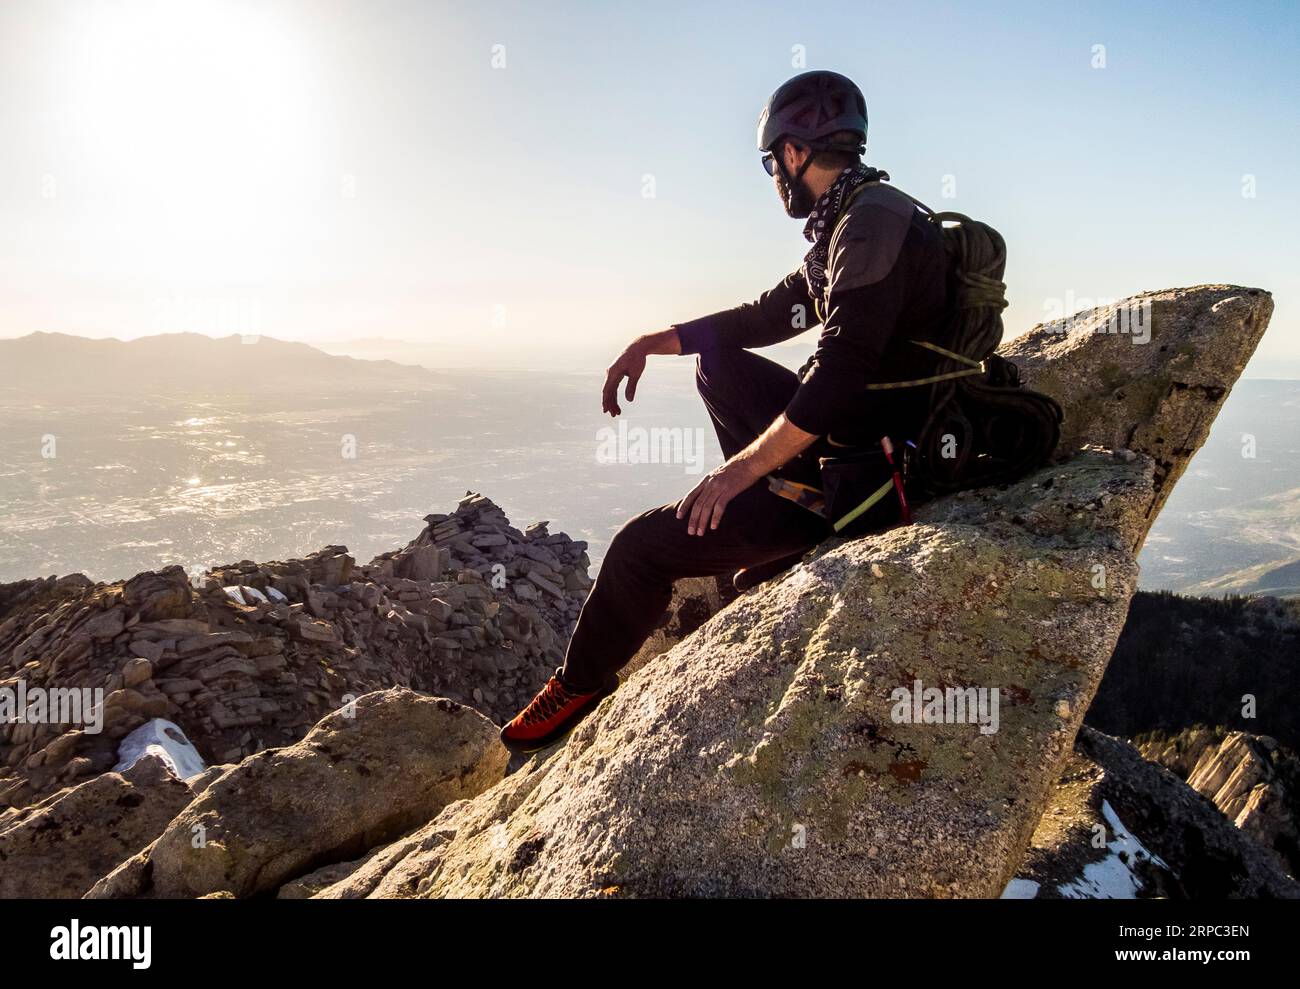 A Man Enjoys The View Of The Salt Lake Valley While Taking A Break As He Hikes Down From Summit Of Lone Peak After Rock Climbing To The Top Stock Photo